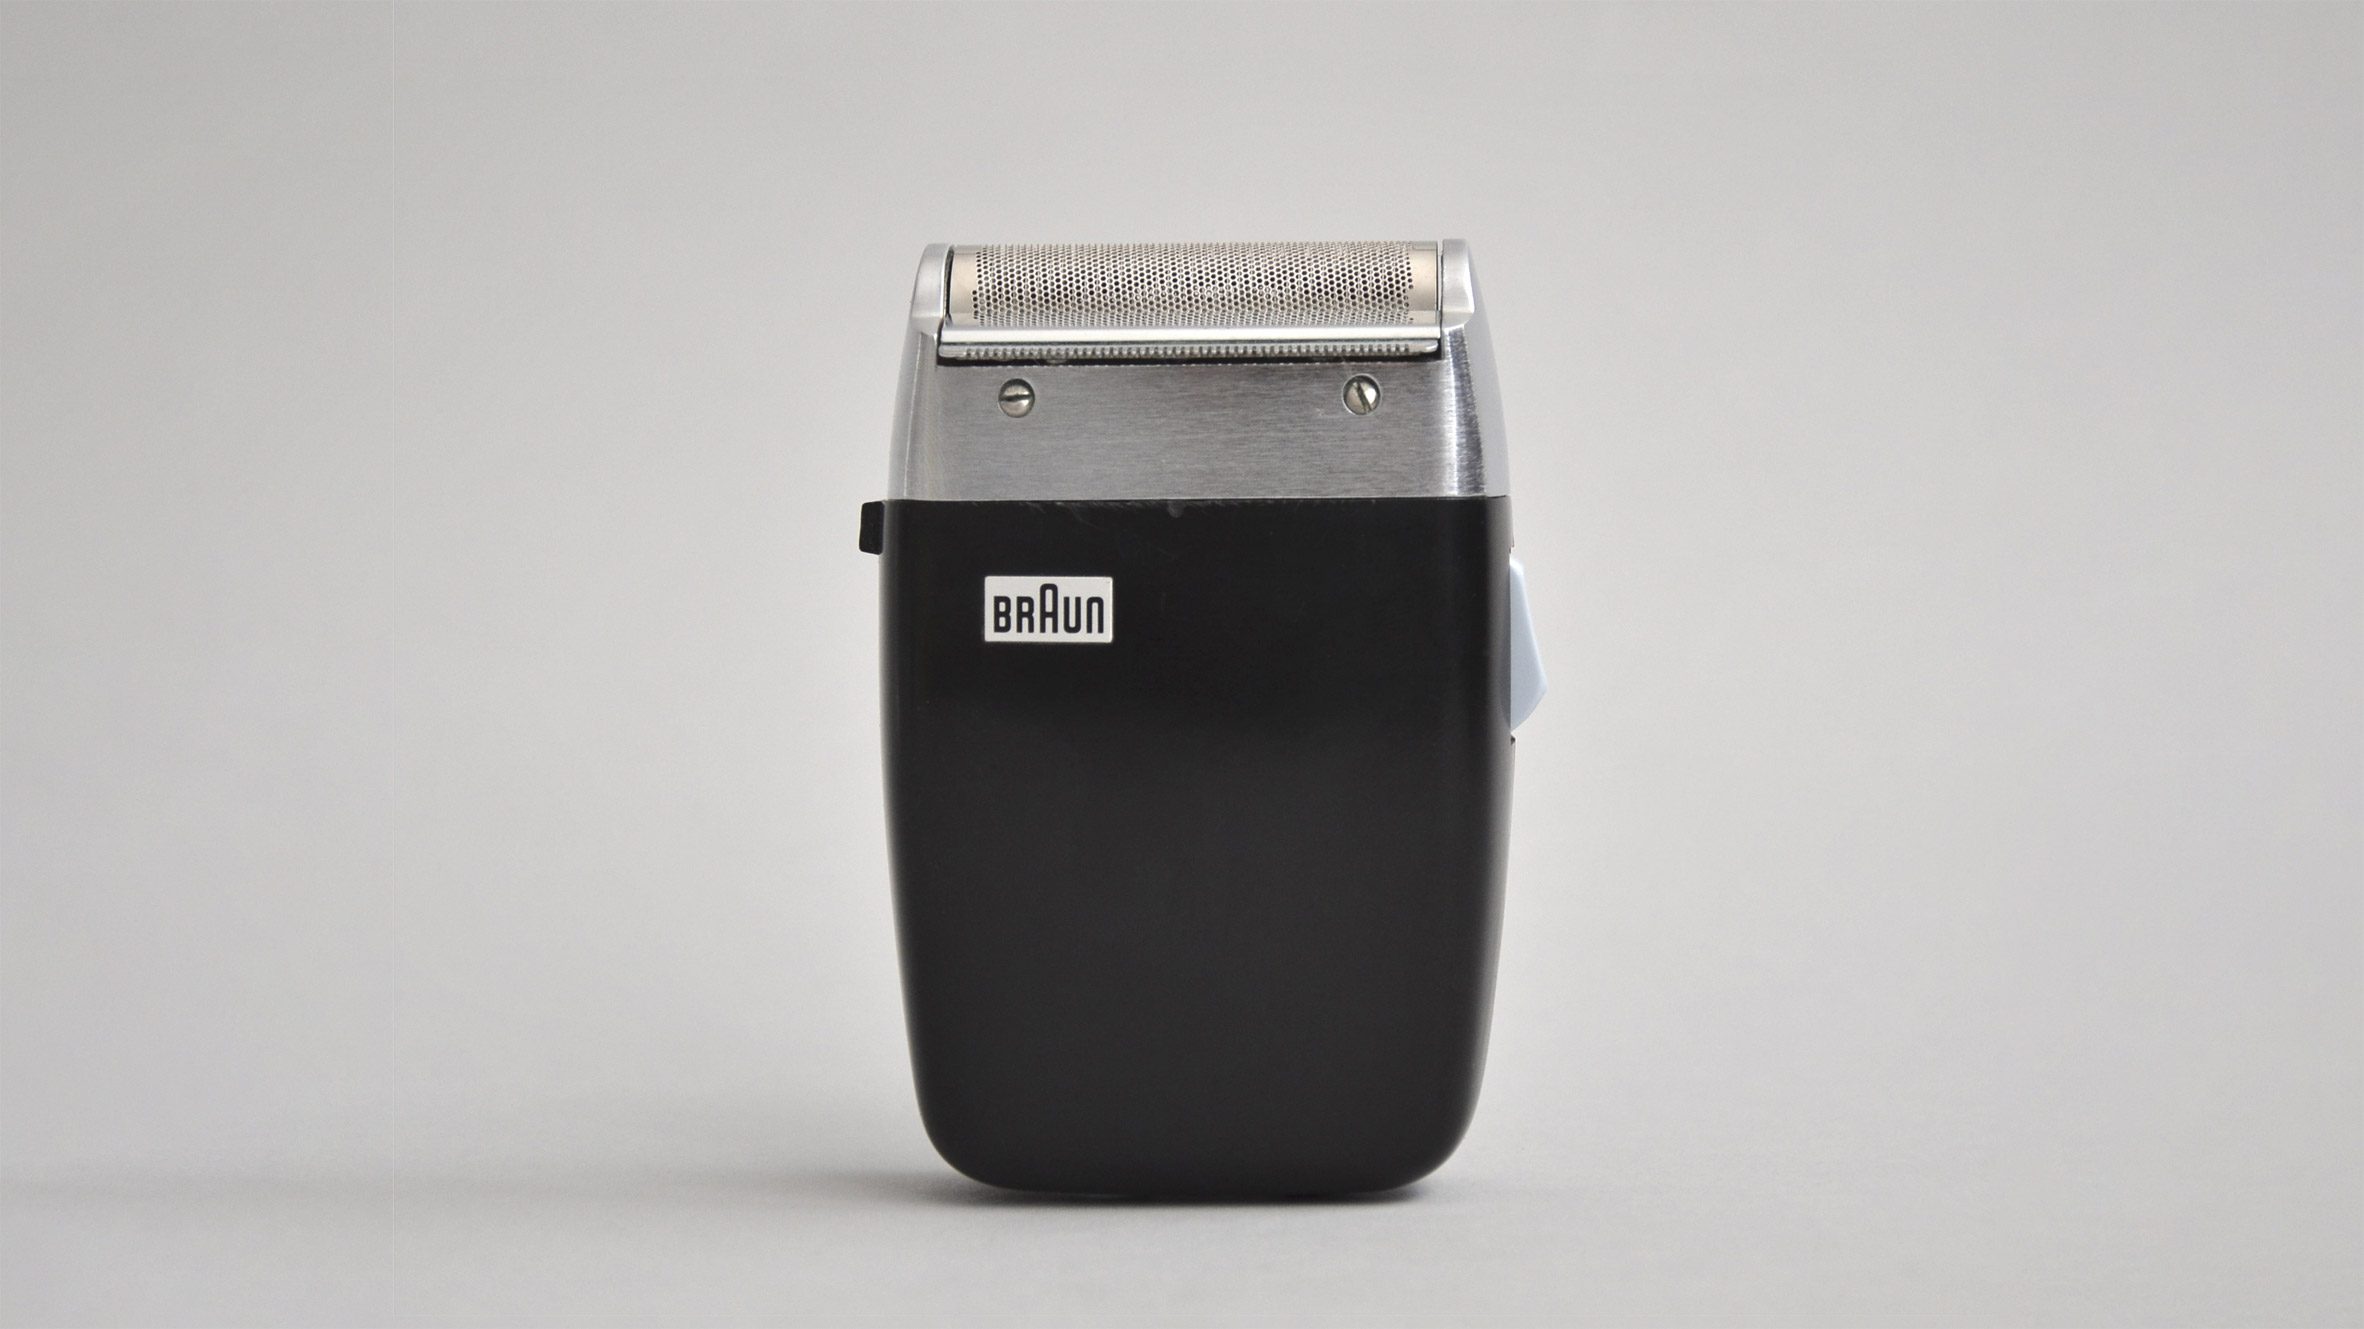 Eight Braun products that are simple, useful and built to last